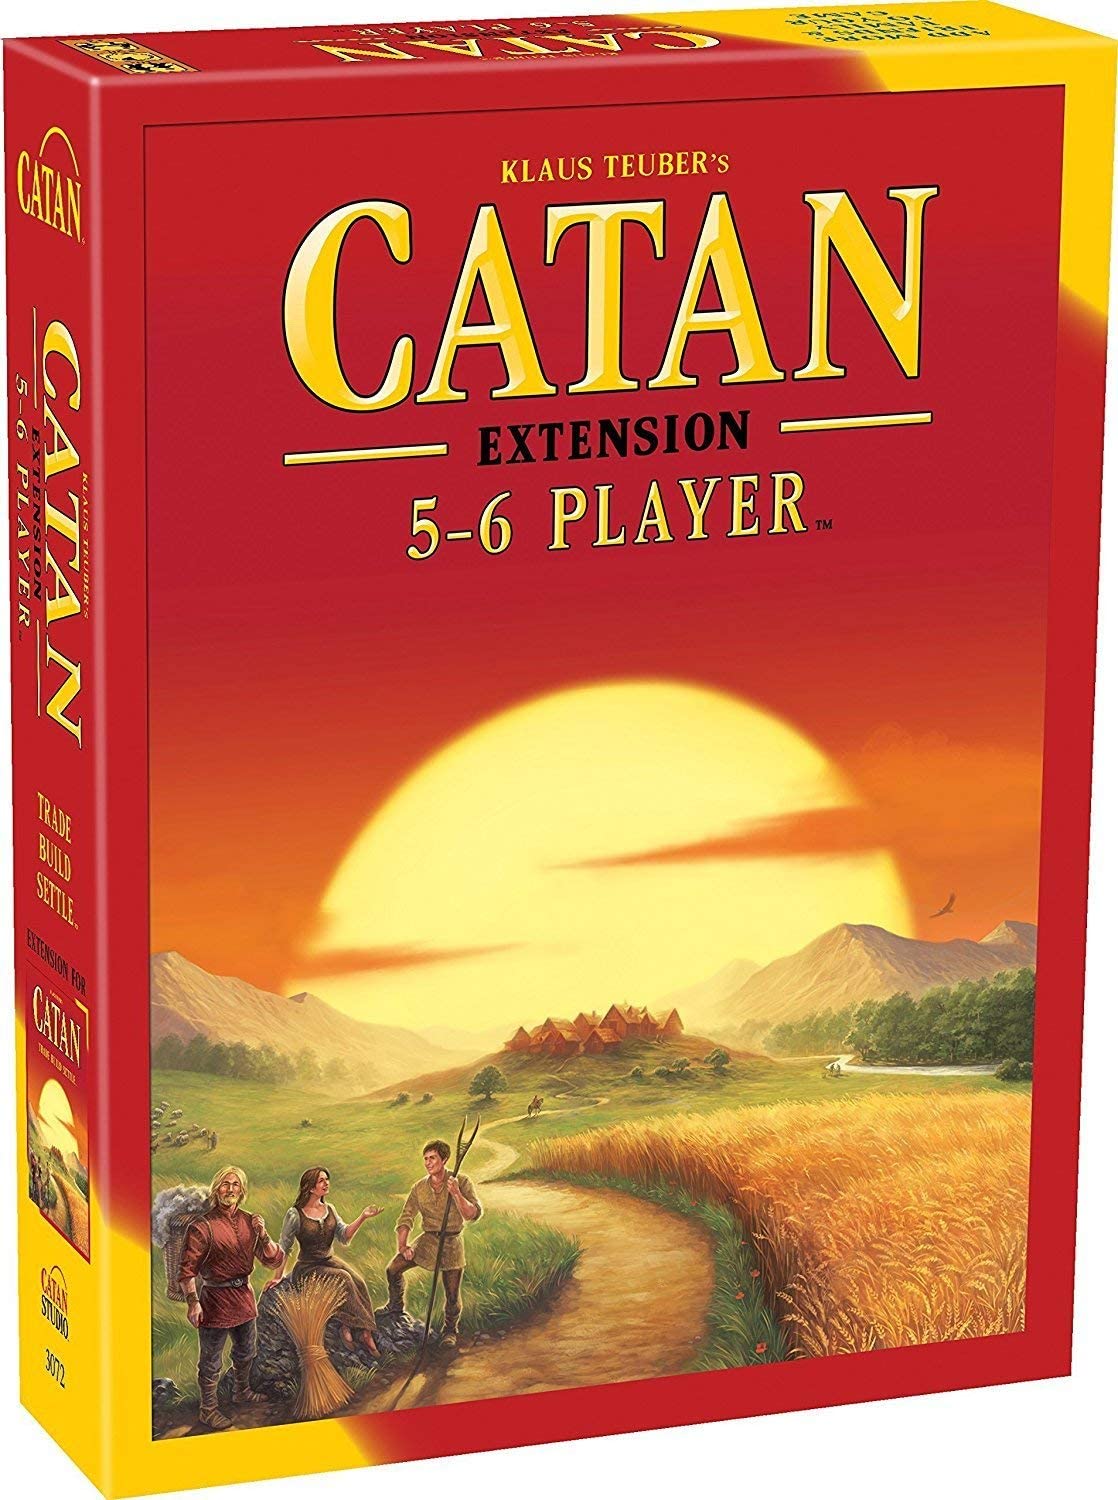 Amazon Deal of the Day - Catan Board Game Extension Allowing a Total of 5 to 6 Players for The Catan Board Game | Family Board Game for $15.99